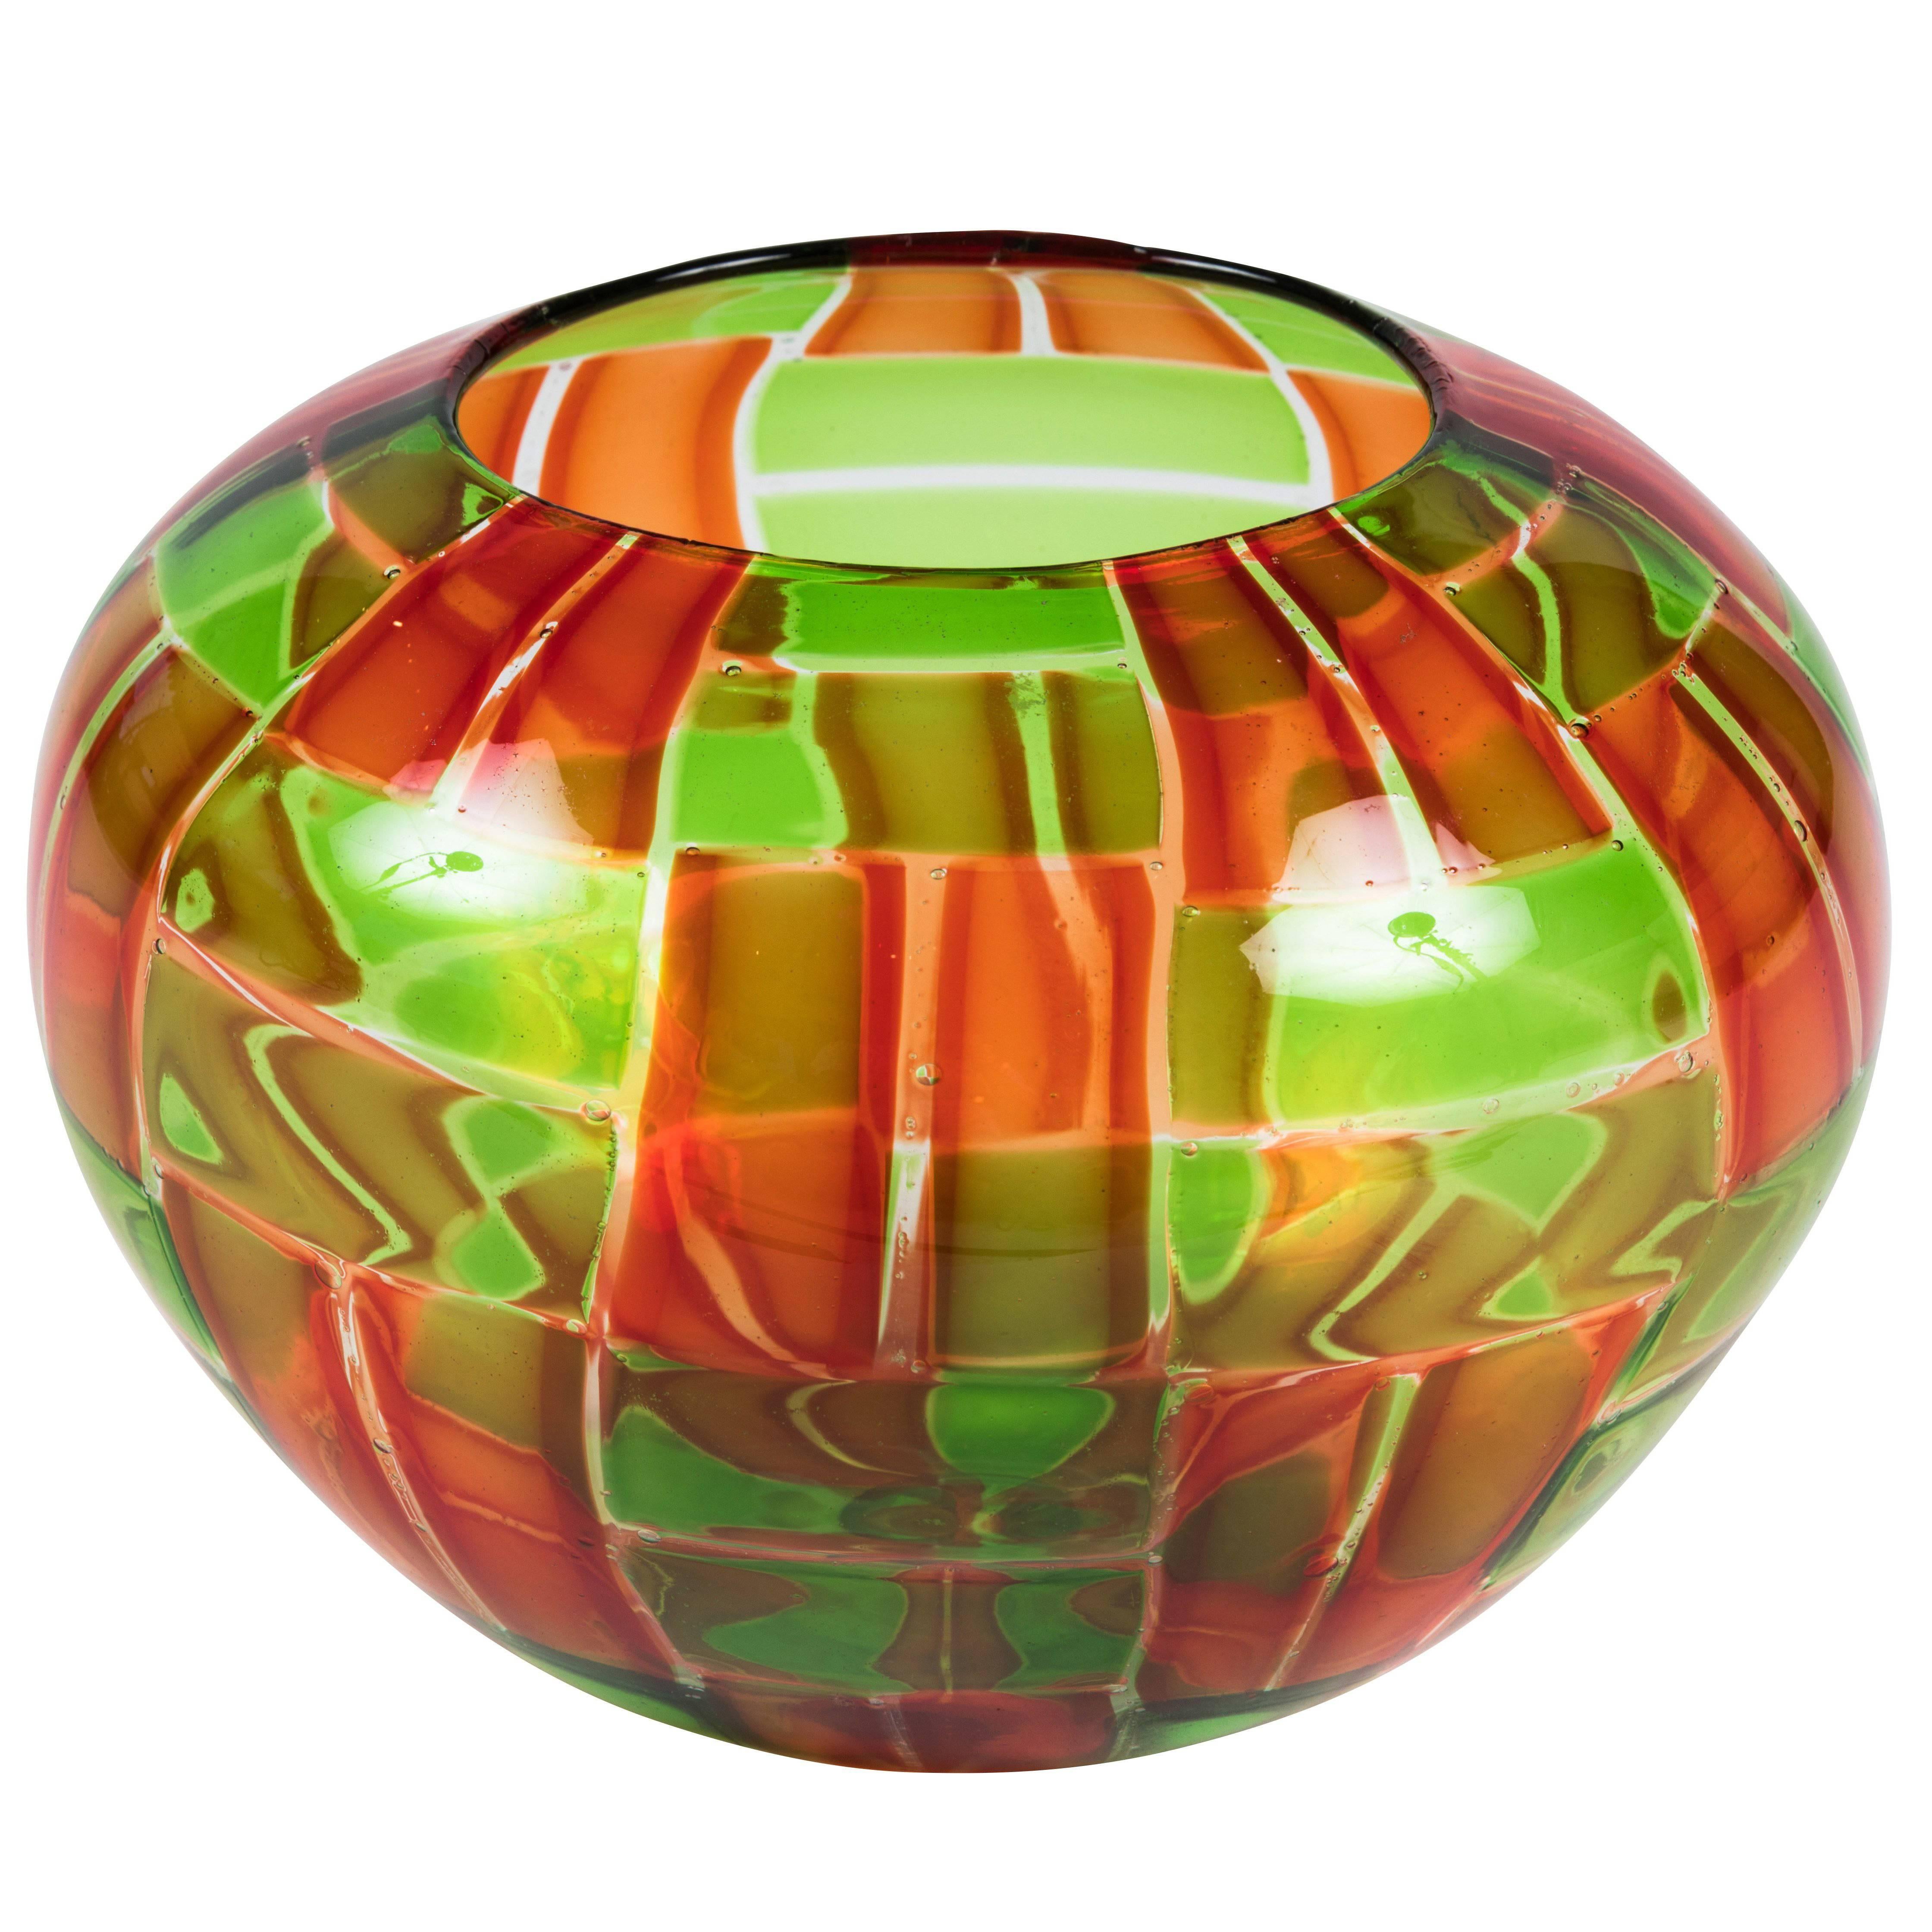 Murano Art Glass Bowl by Gianni Toso